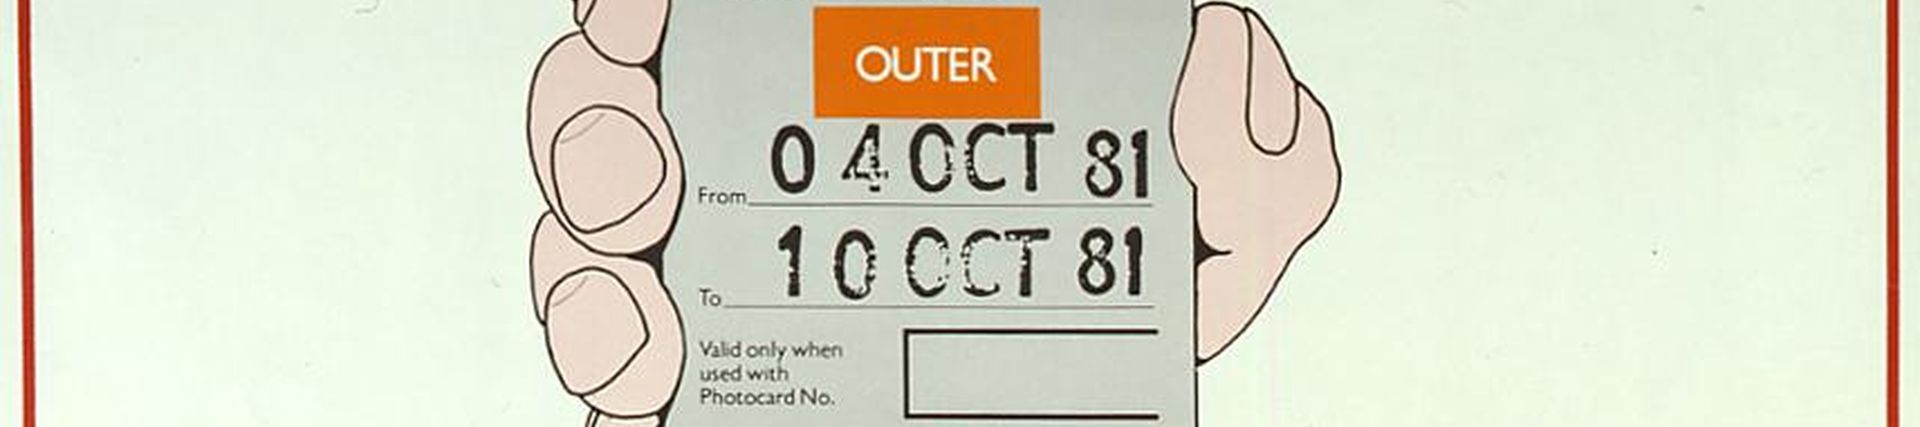 Poster; The new weekly bus passes, unknown, 1981